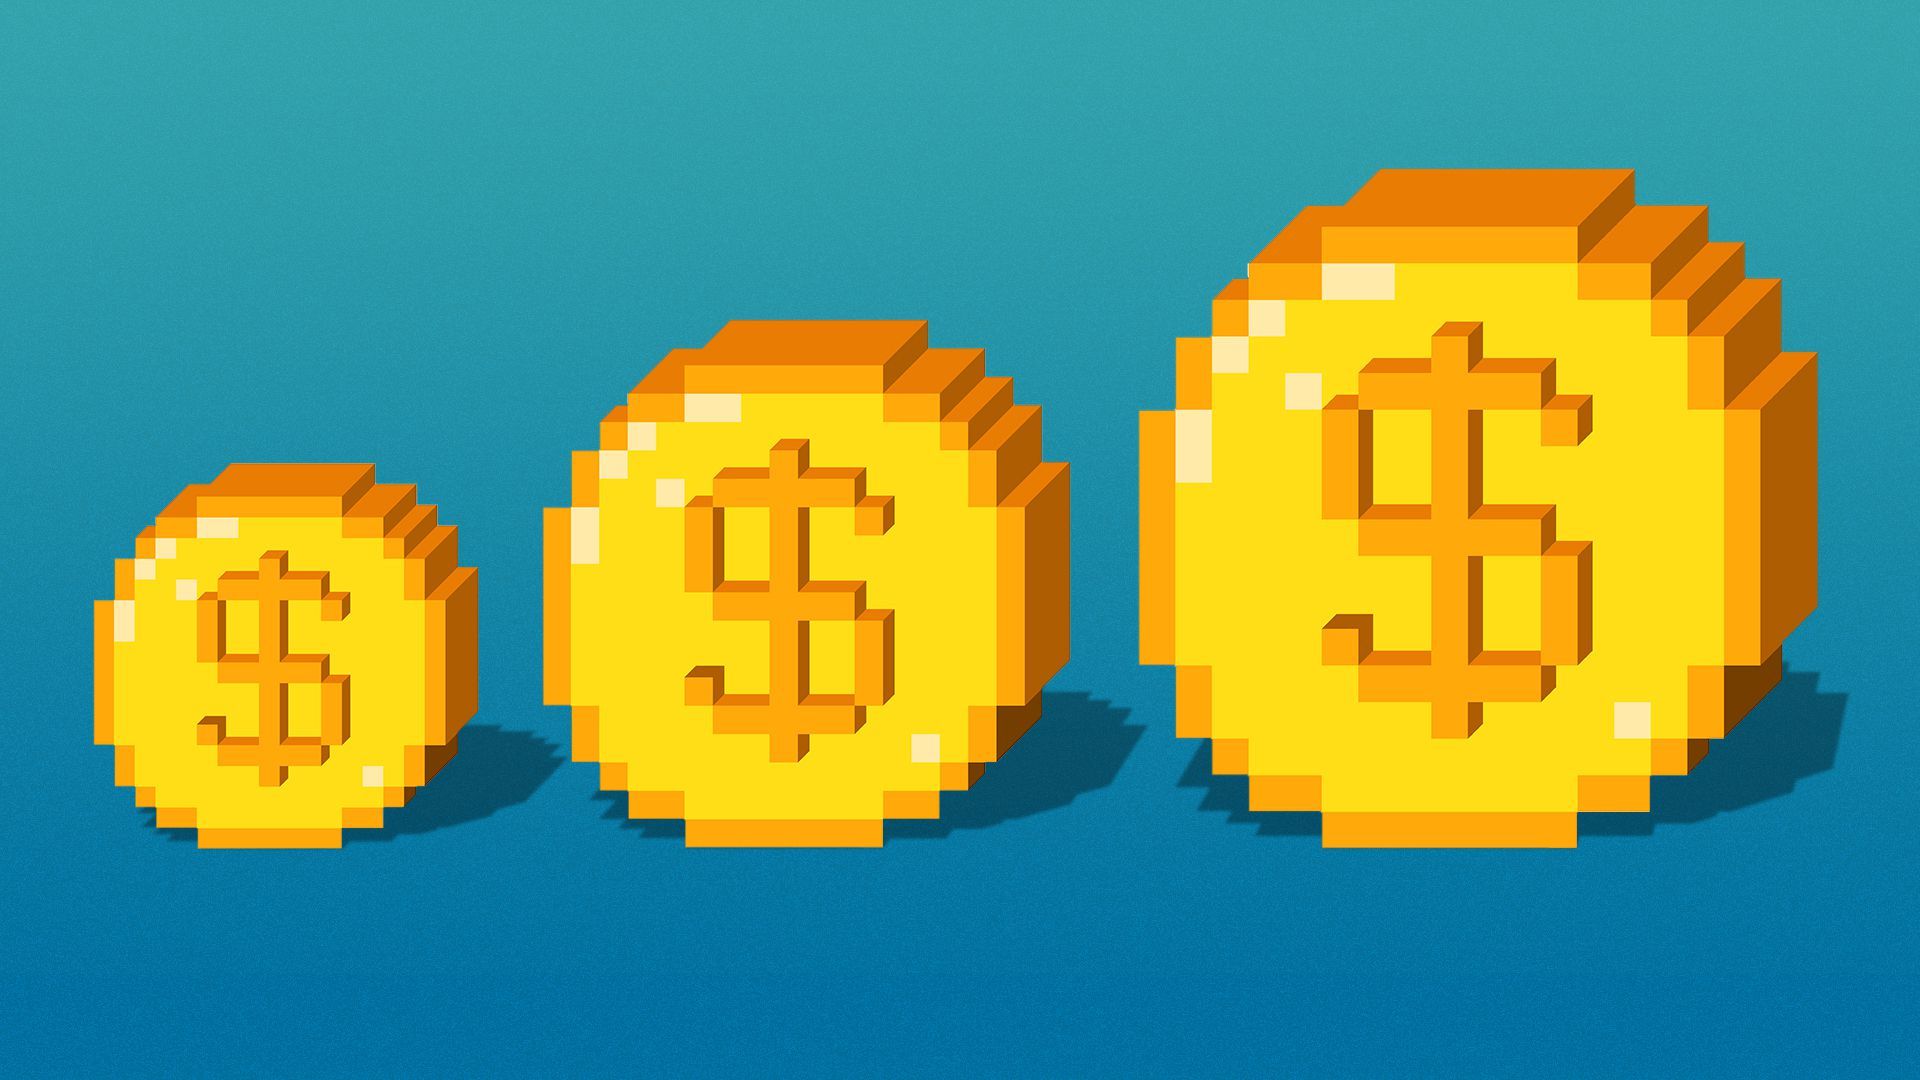 Illustration of pixelated game coins arranged in order of ascending size